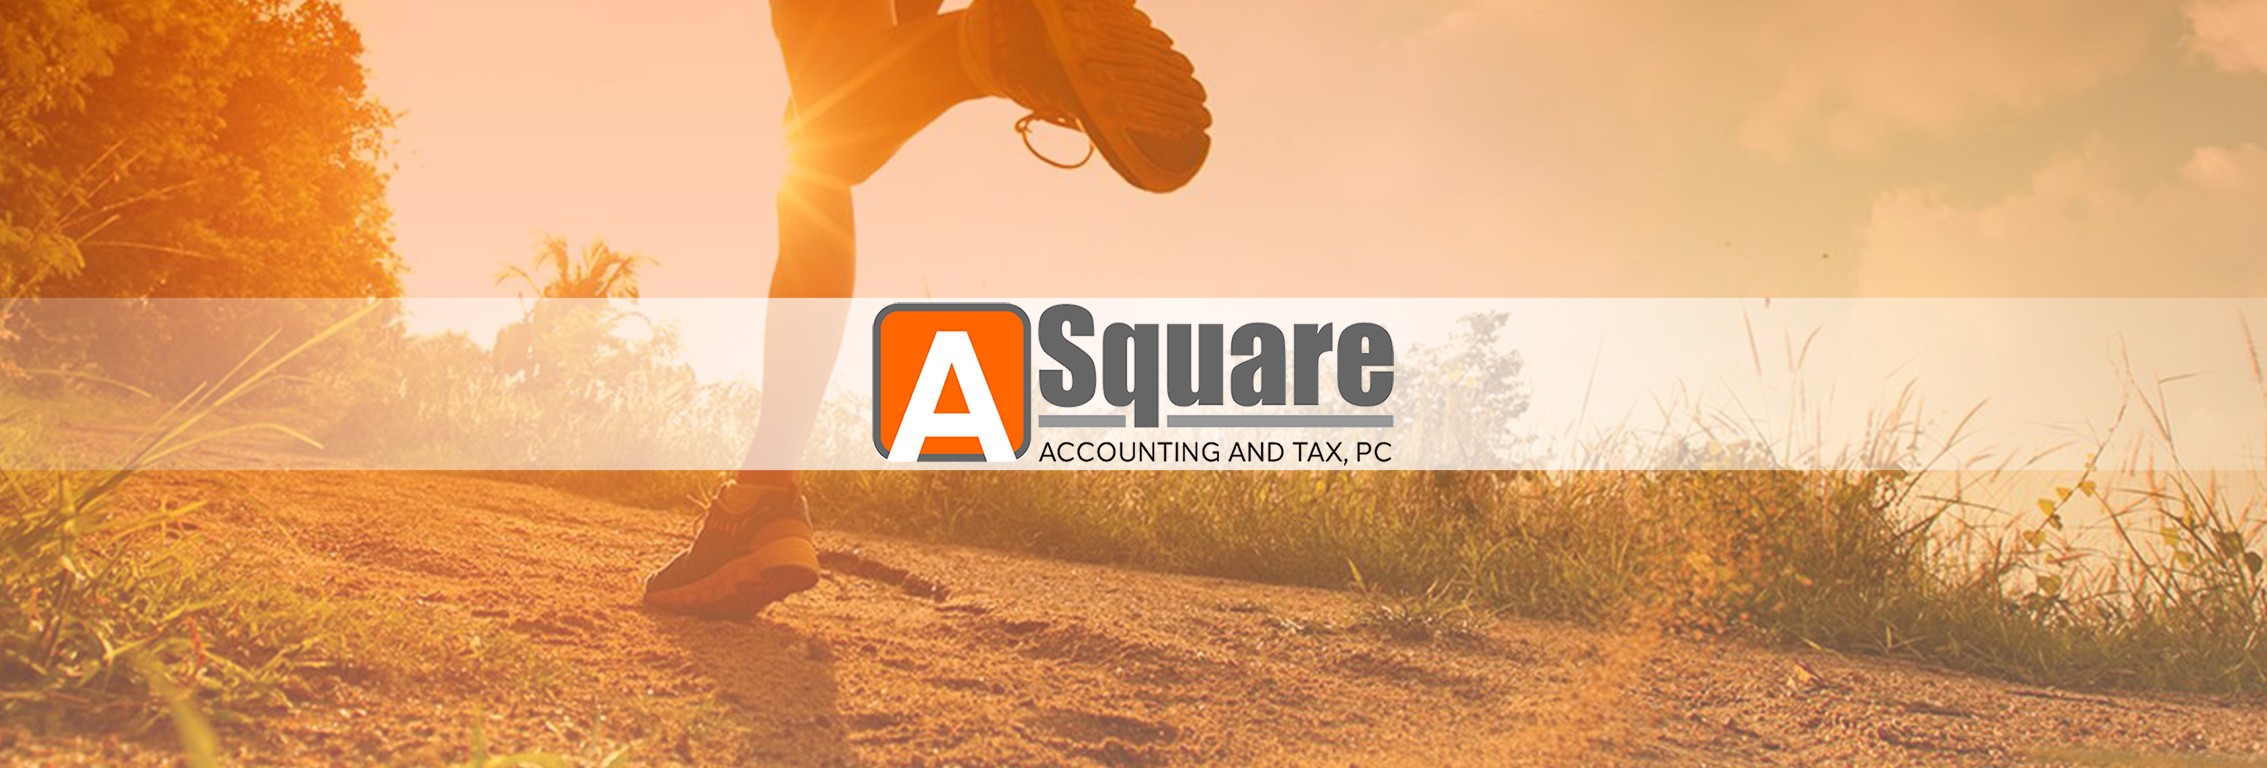 A Square Accounting And Tax, PC logo